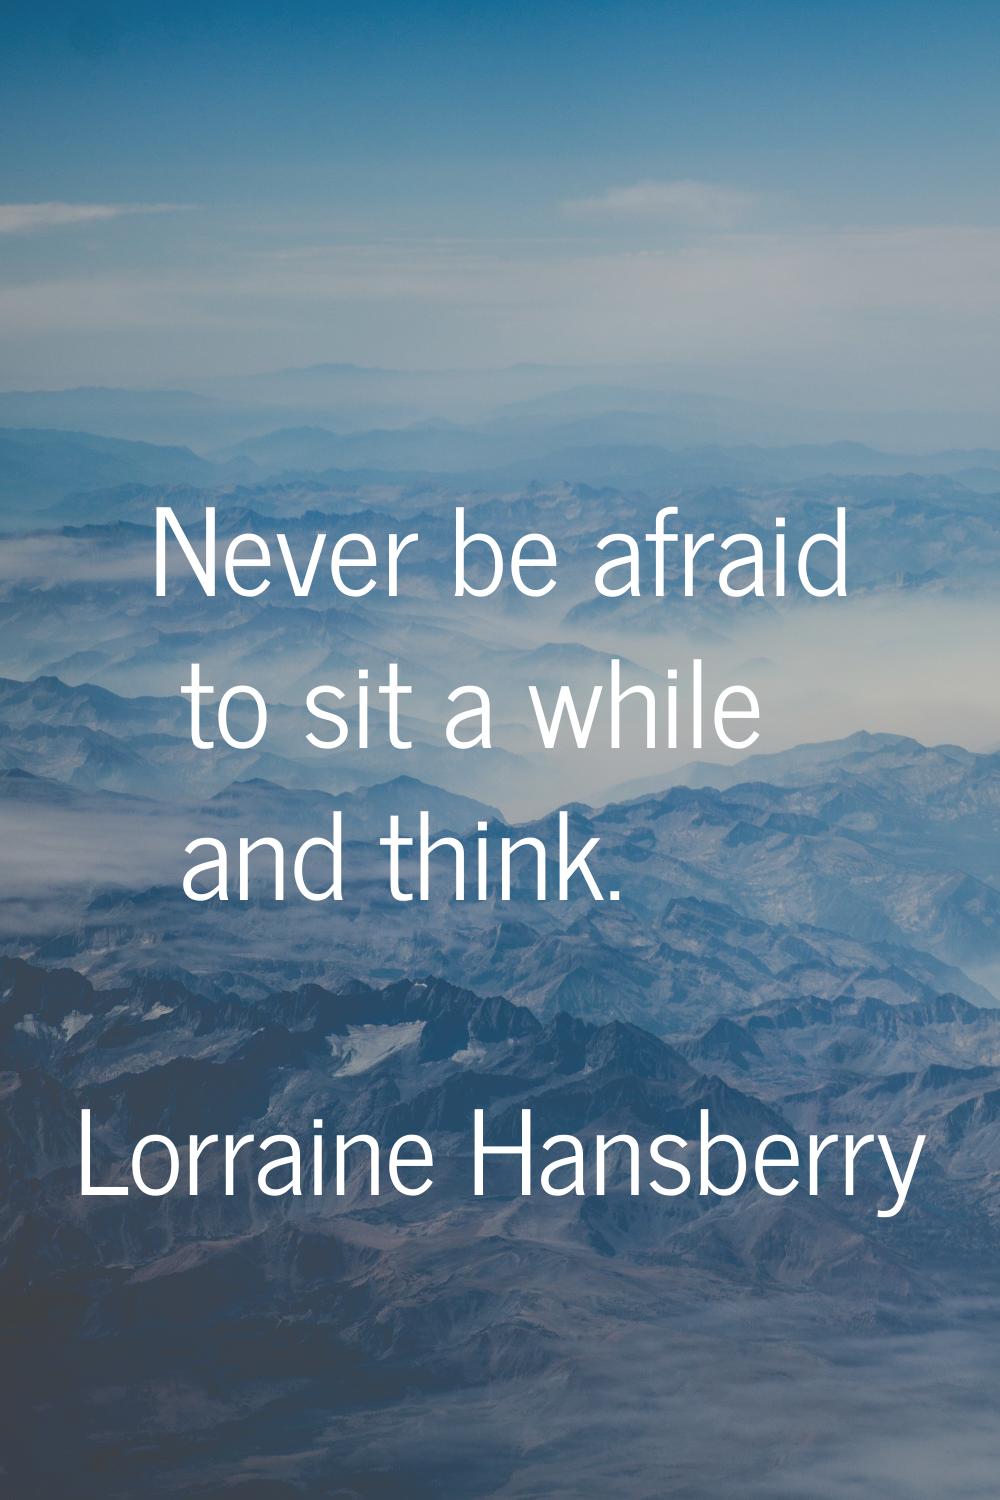 Never be afraid to sit a while and think.